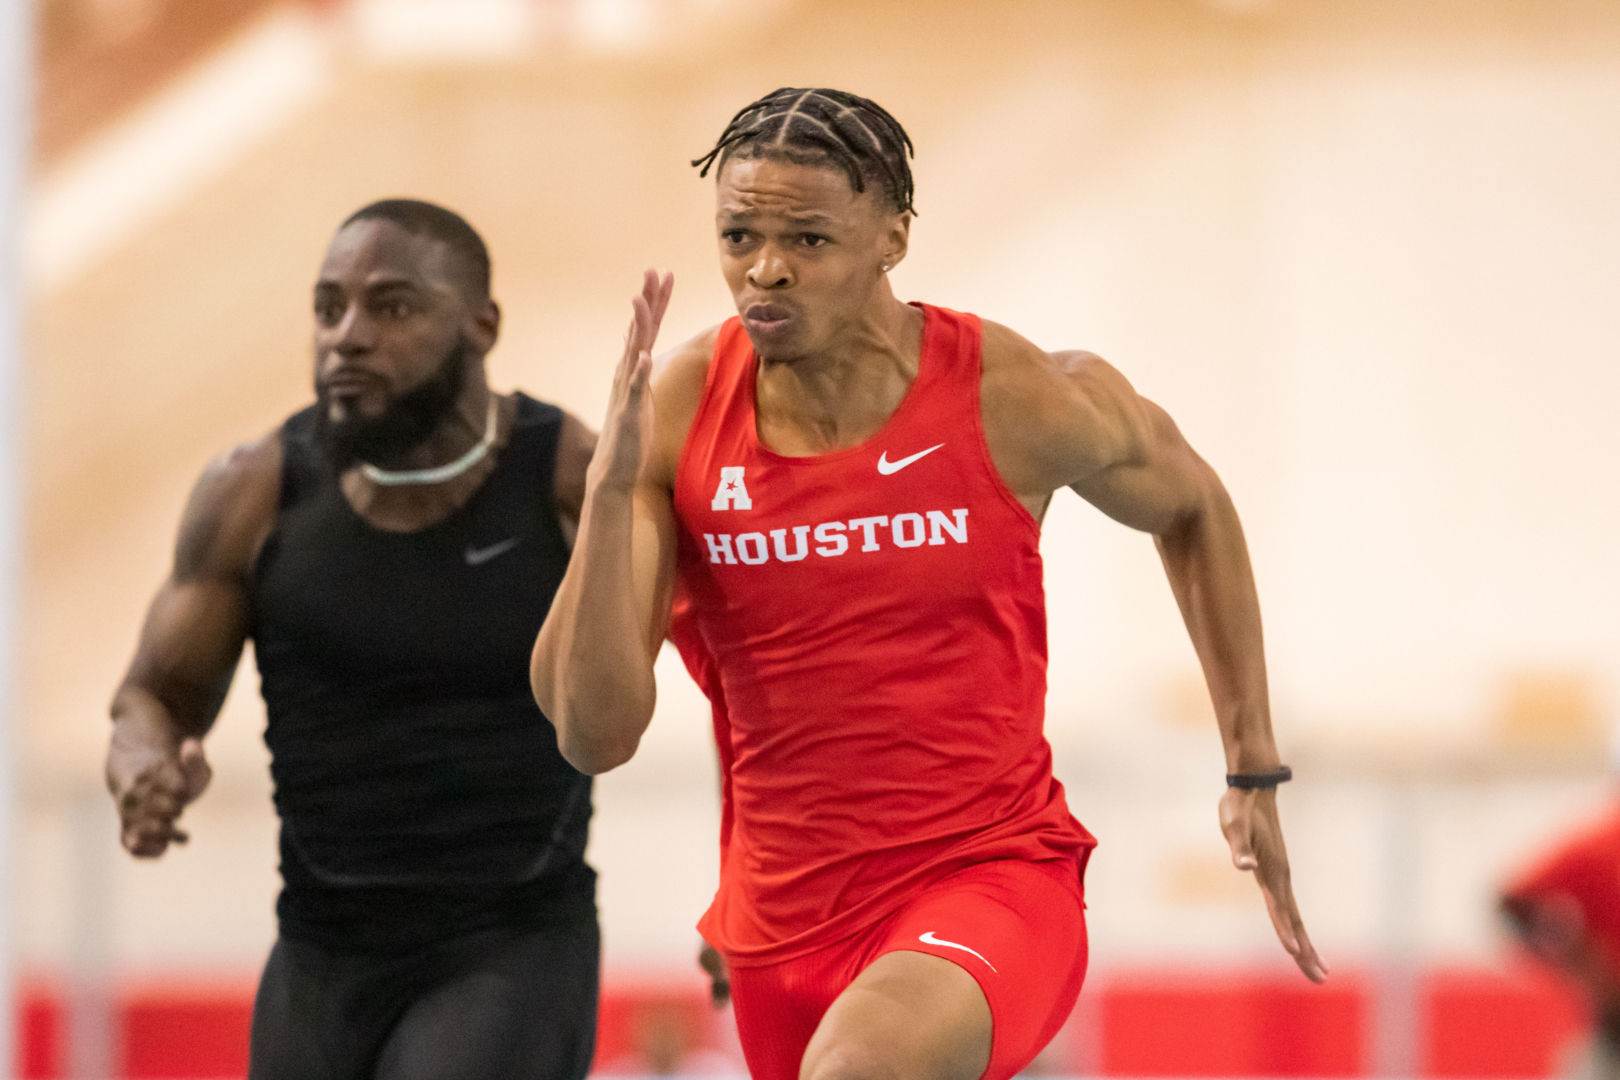 UH track and field junior Shaun Maswanganyi opened up his 2023 season with a first place finish in the 60-meter dash. | Courtesy of Joe Buvid/UH athletics